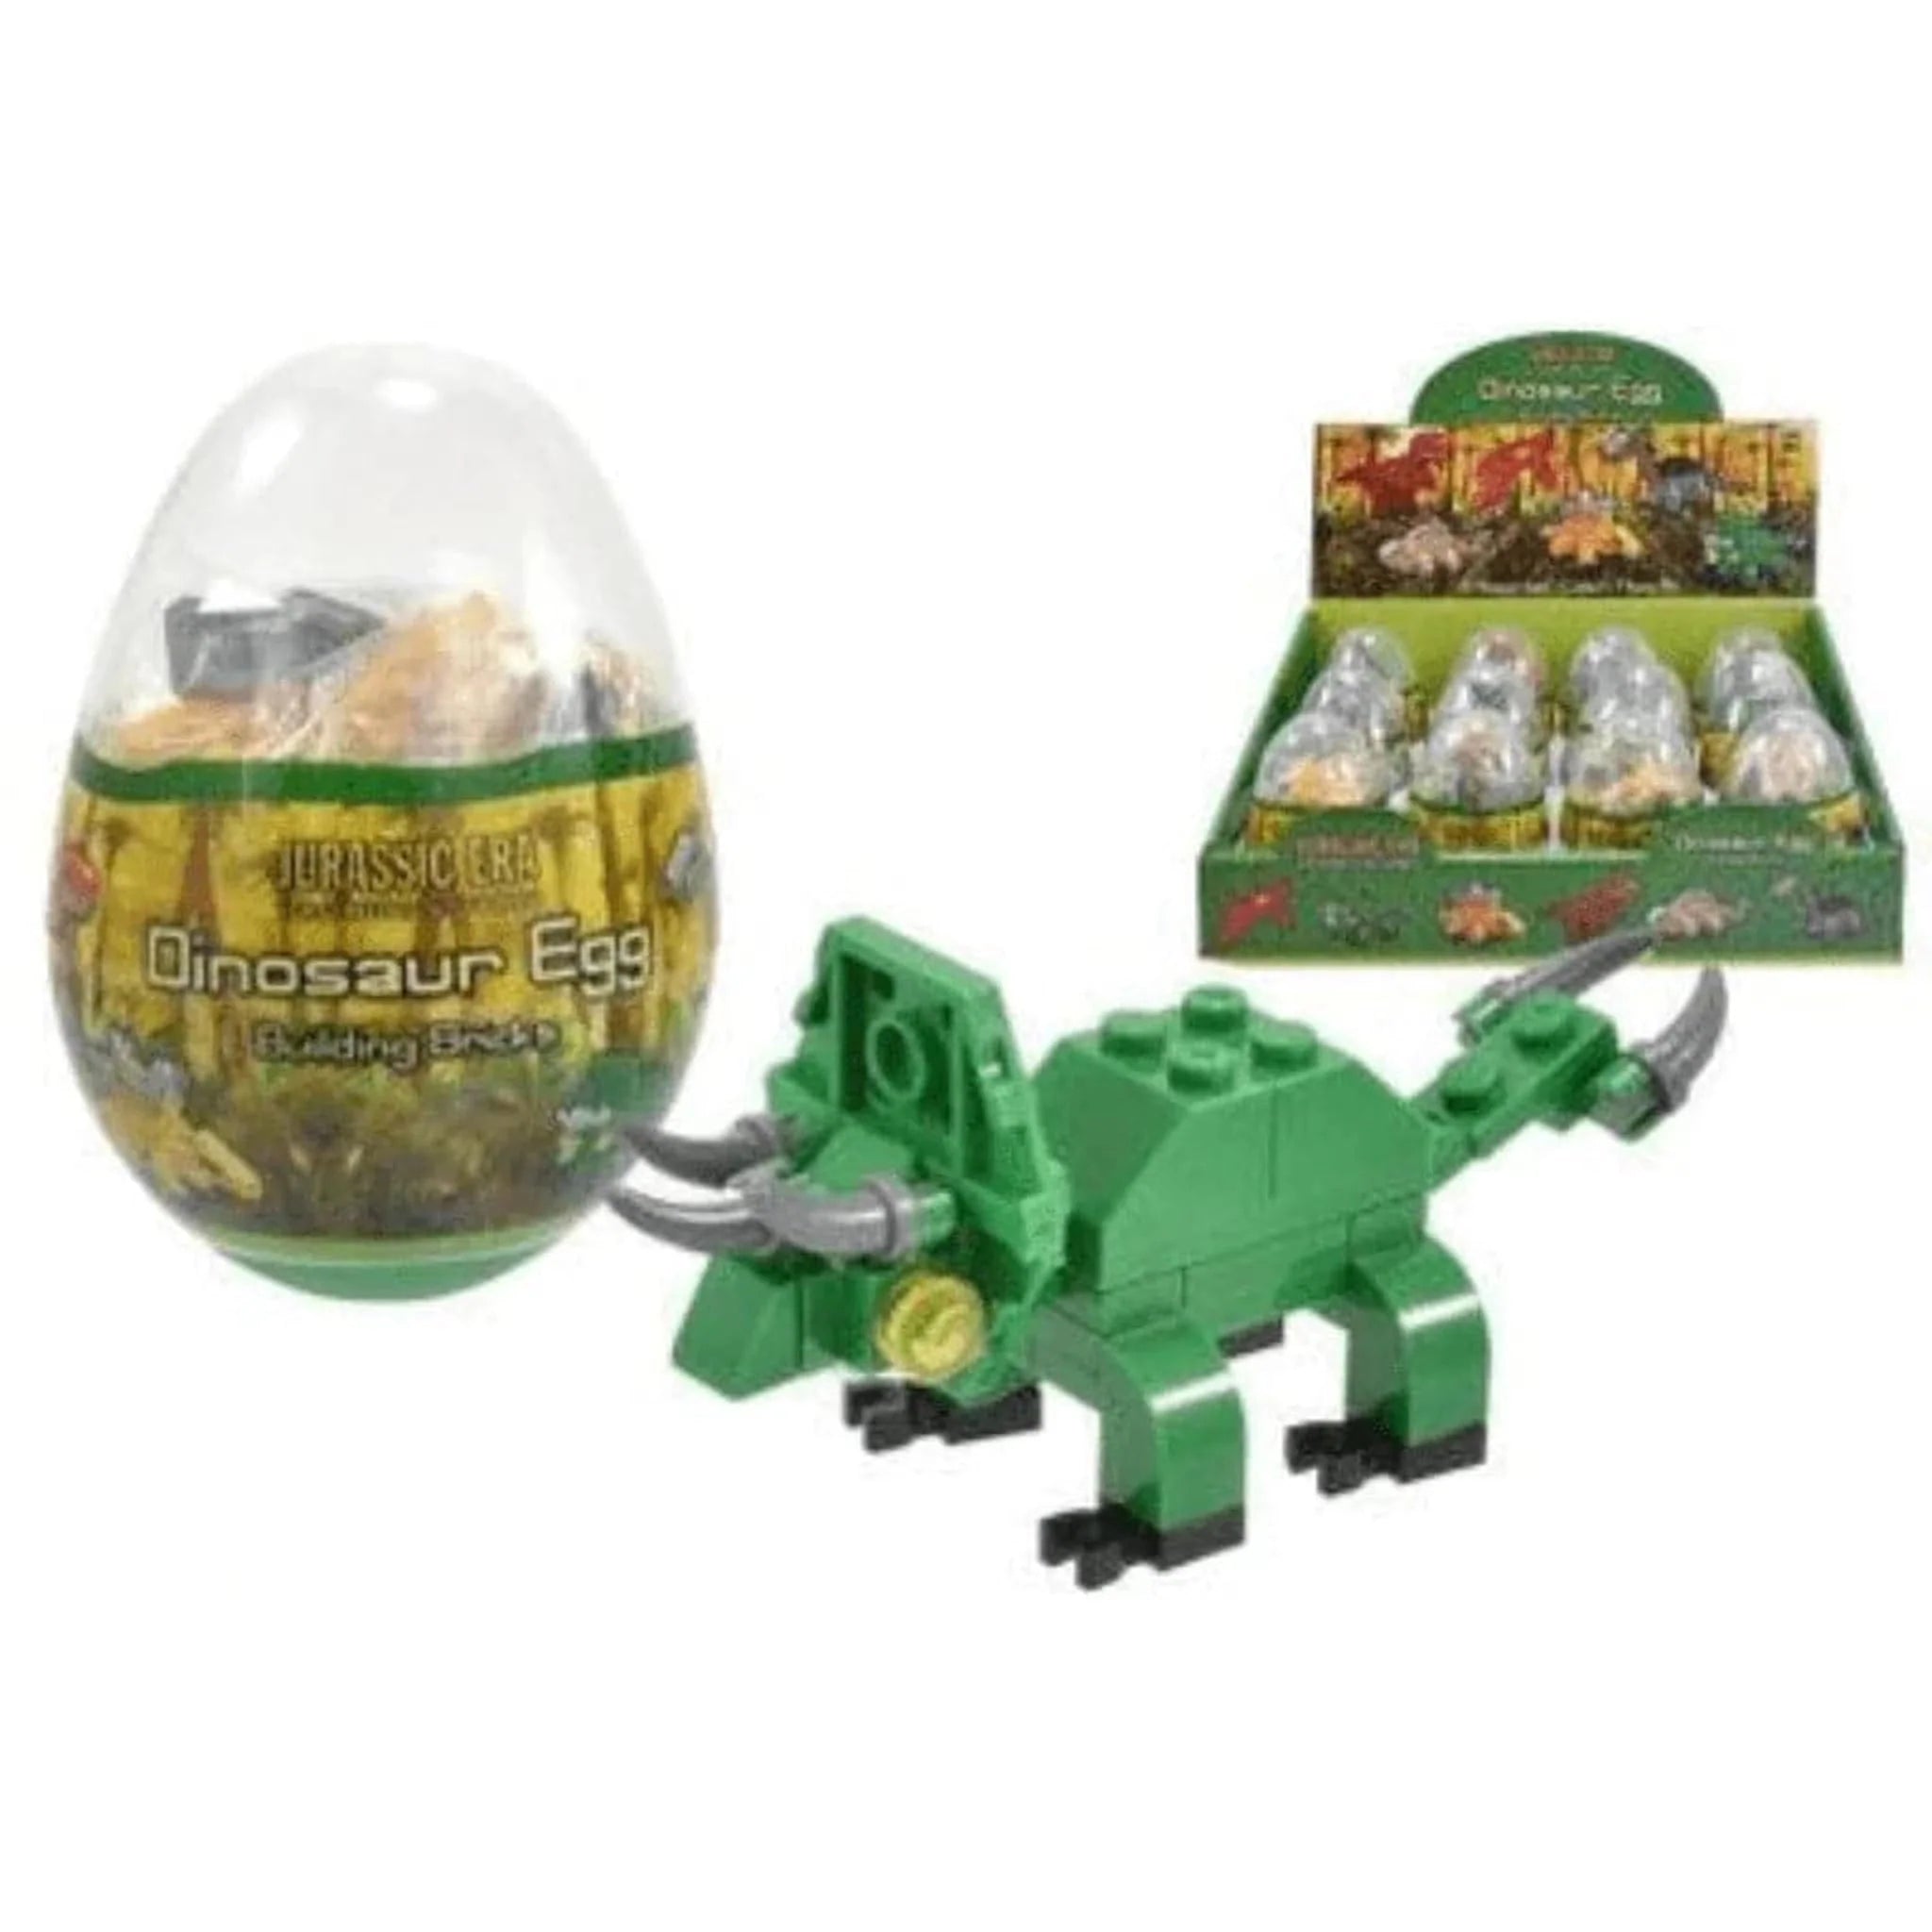 Dinosaur Brick Figures In An Egg - Kids Party Craft